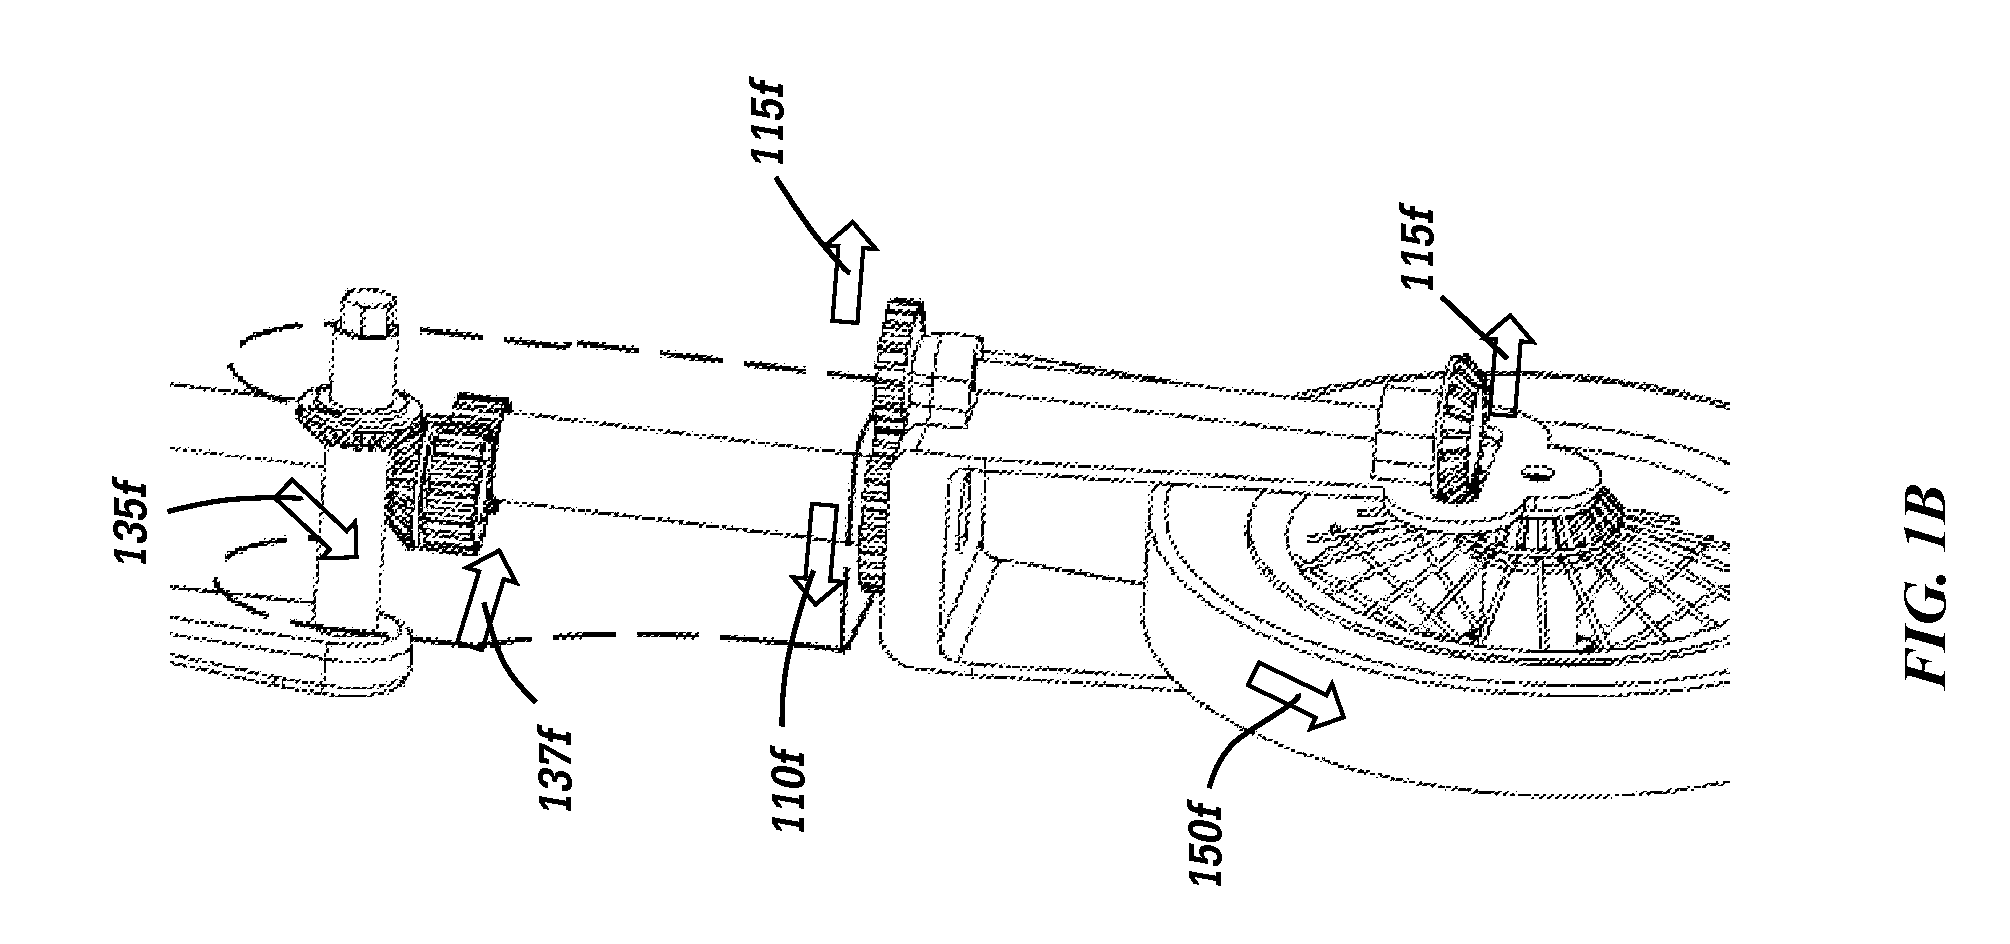 Drive-and-chassis mechanisms used in the design of compact, carry-on vehicles